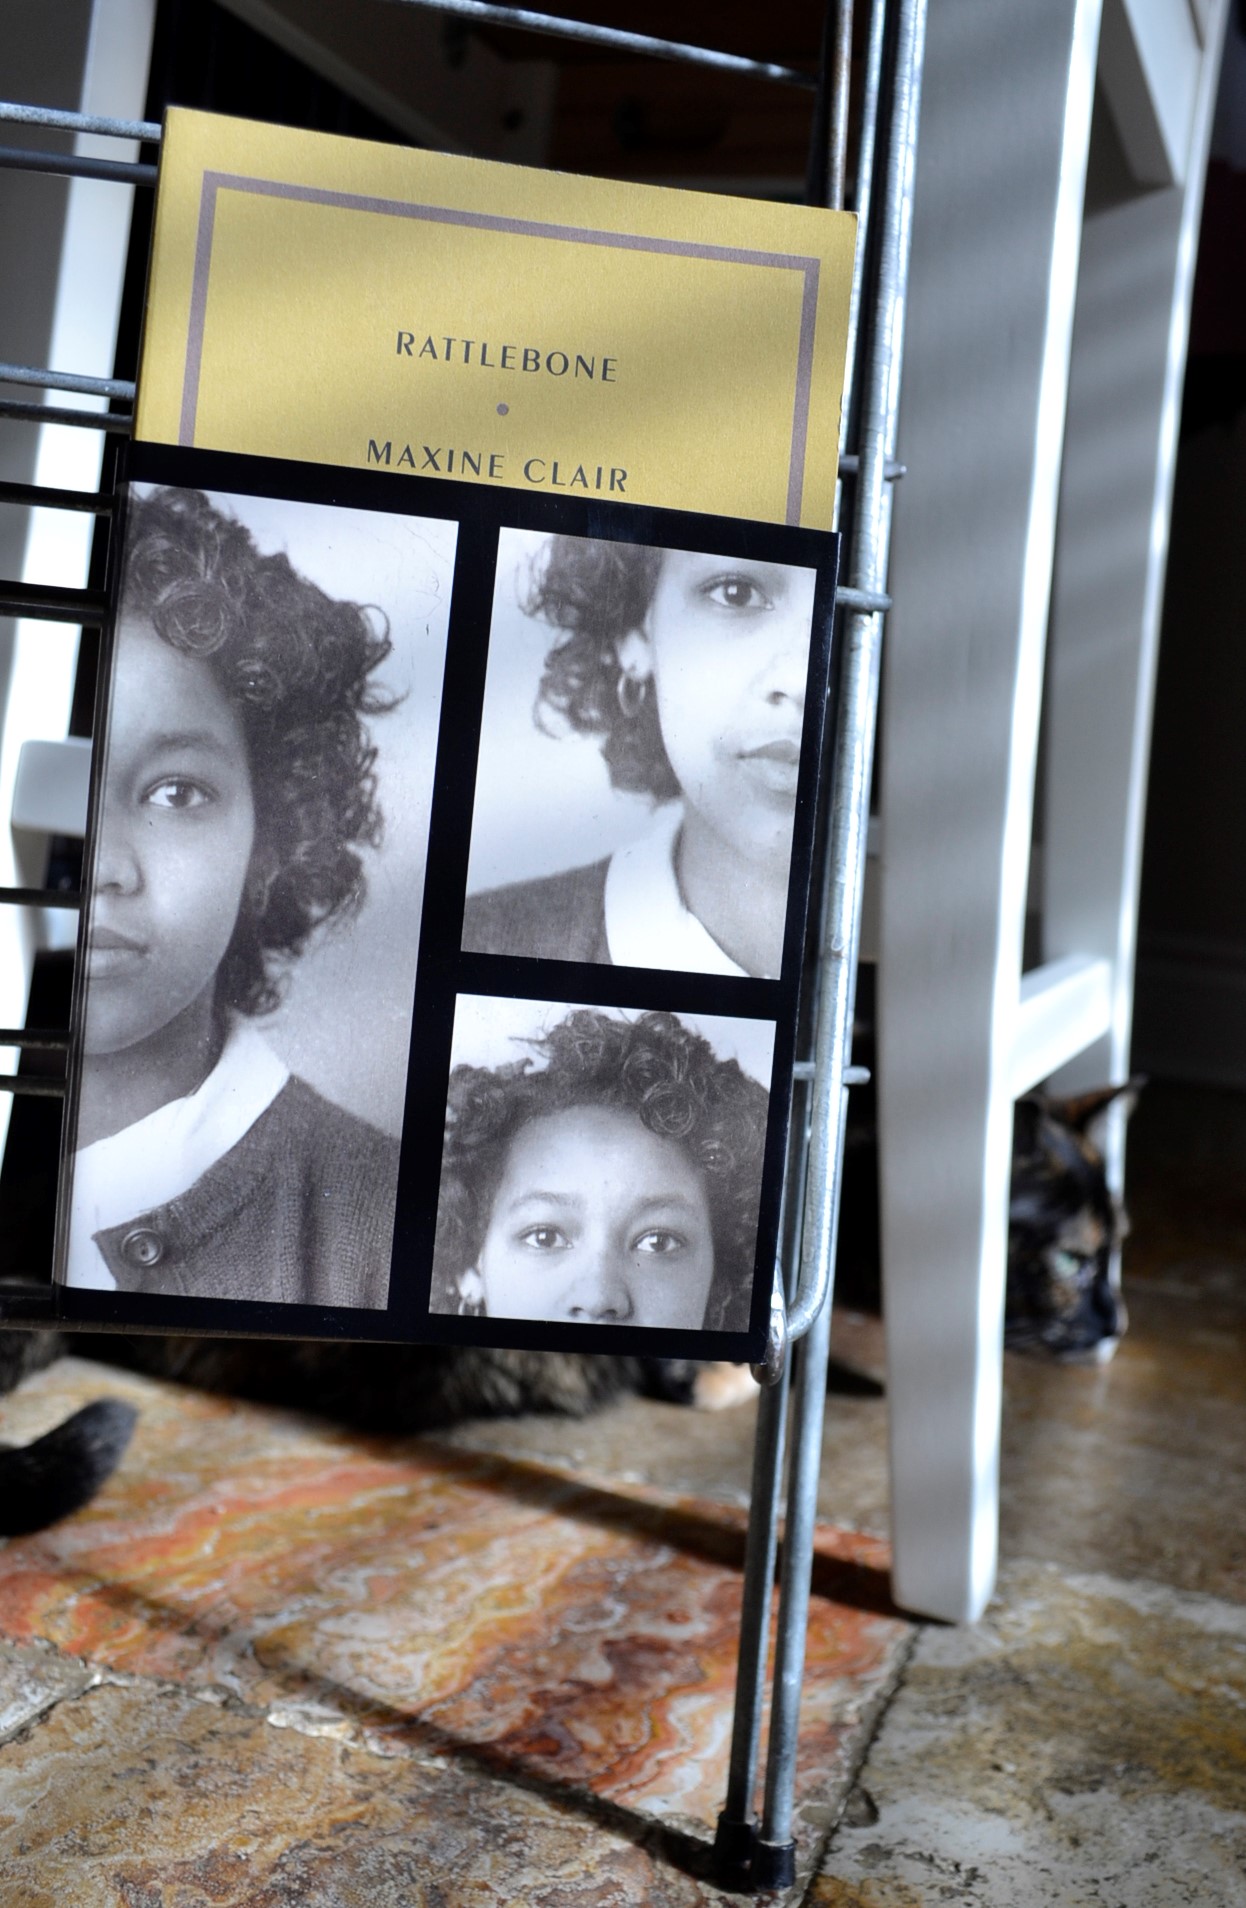 Maxine Clair's Rattlebone is a yellow book with a 3/4 height dust jacket featuring a young Black woman.